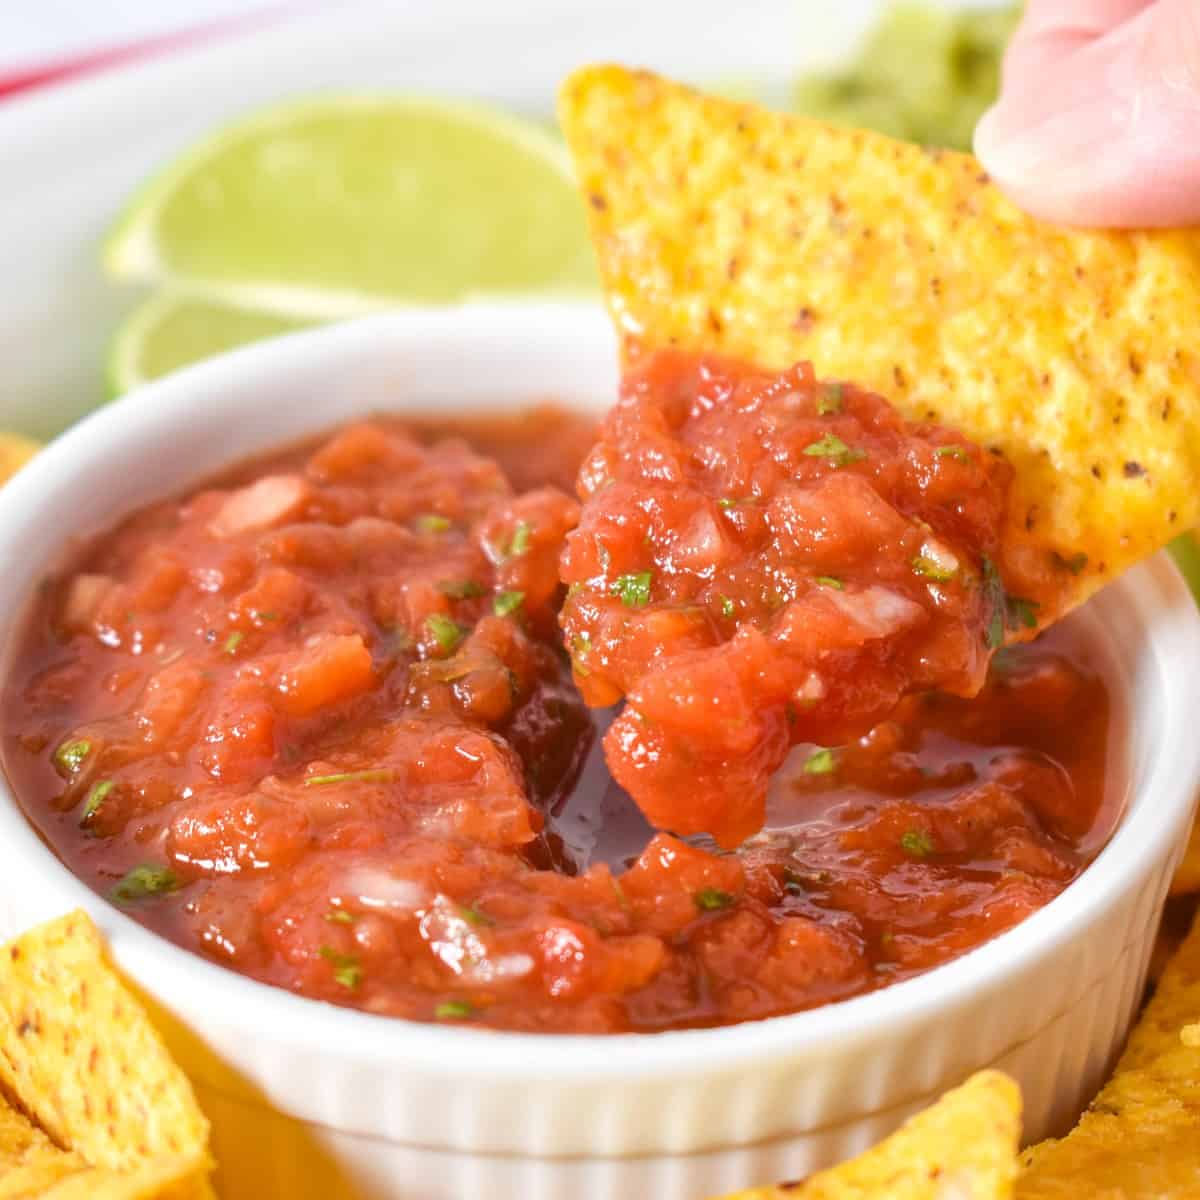 A close up image of a chip scooping some salsa out of a white bowl.